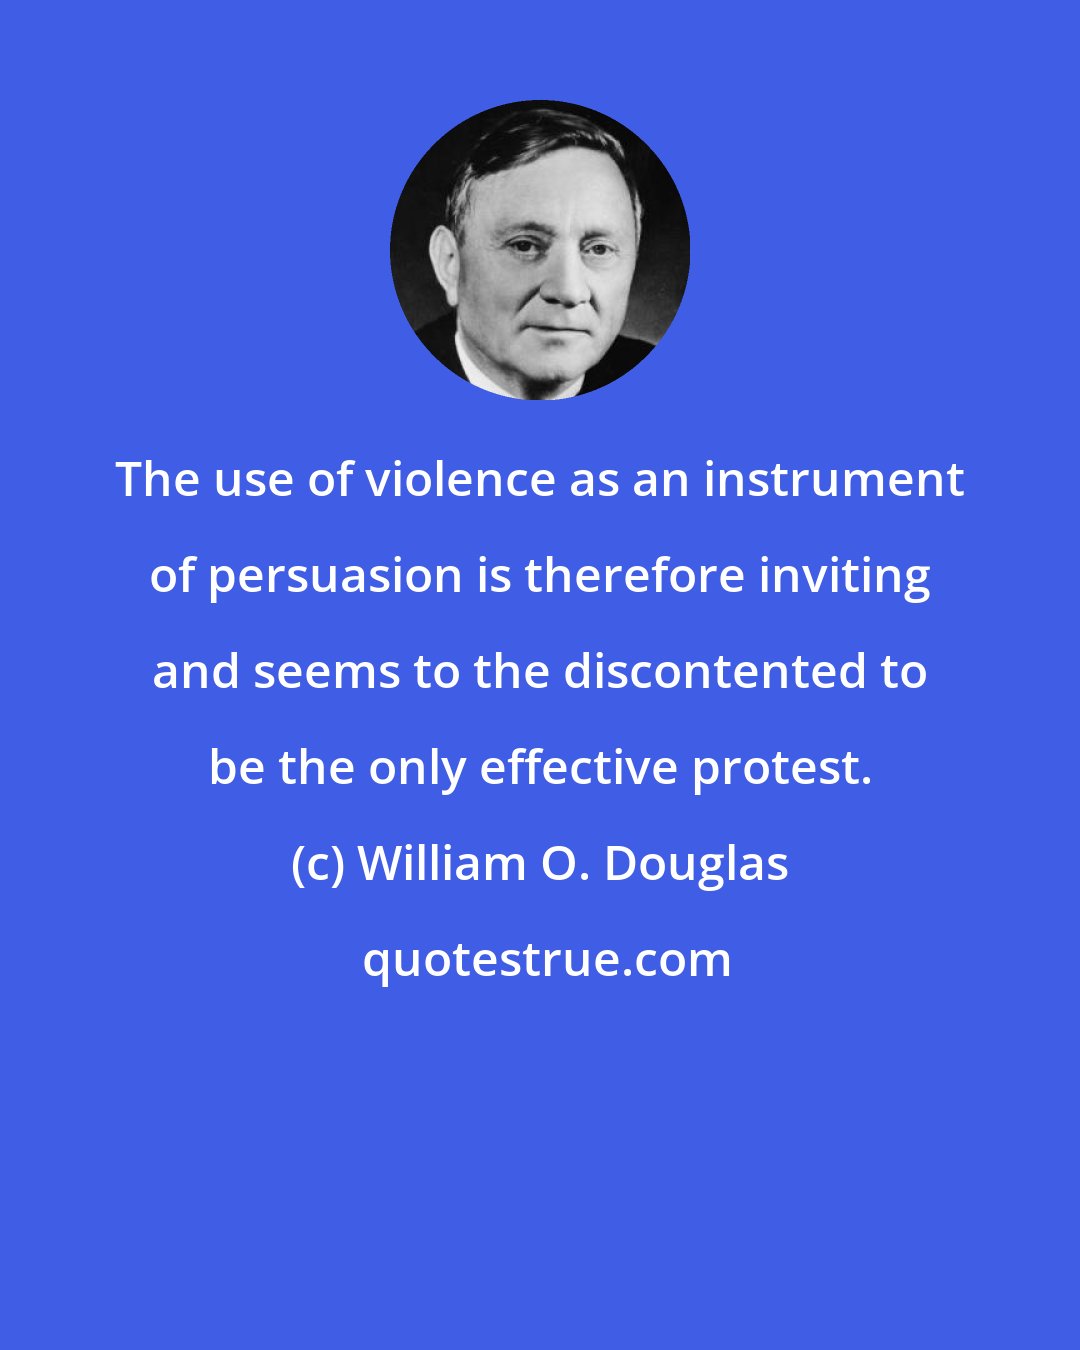 William O. Douglas: The use of violence as an instrument of persuasion is therefore inviting and seems to the discontented to be the only effective protest.